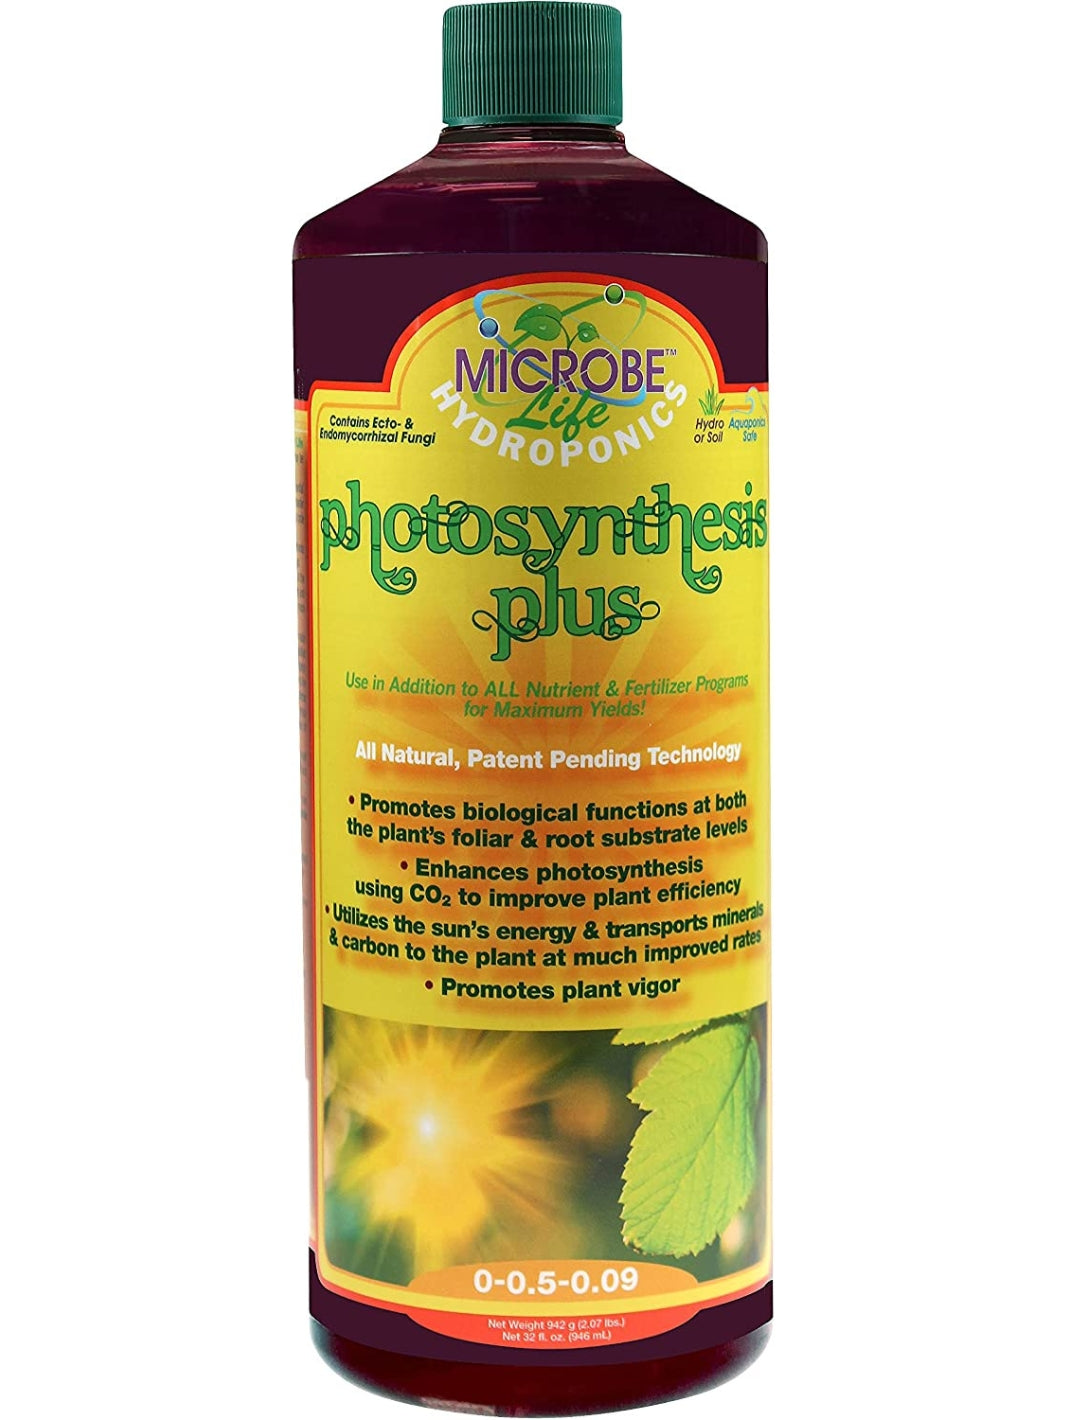 Microbe Life Hydroponics Photosynthesis Plus in 1 Quart Bottle